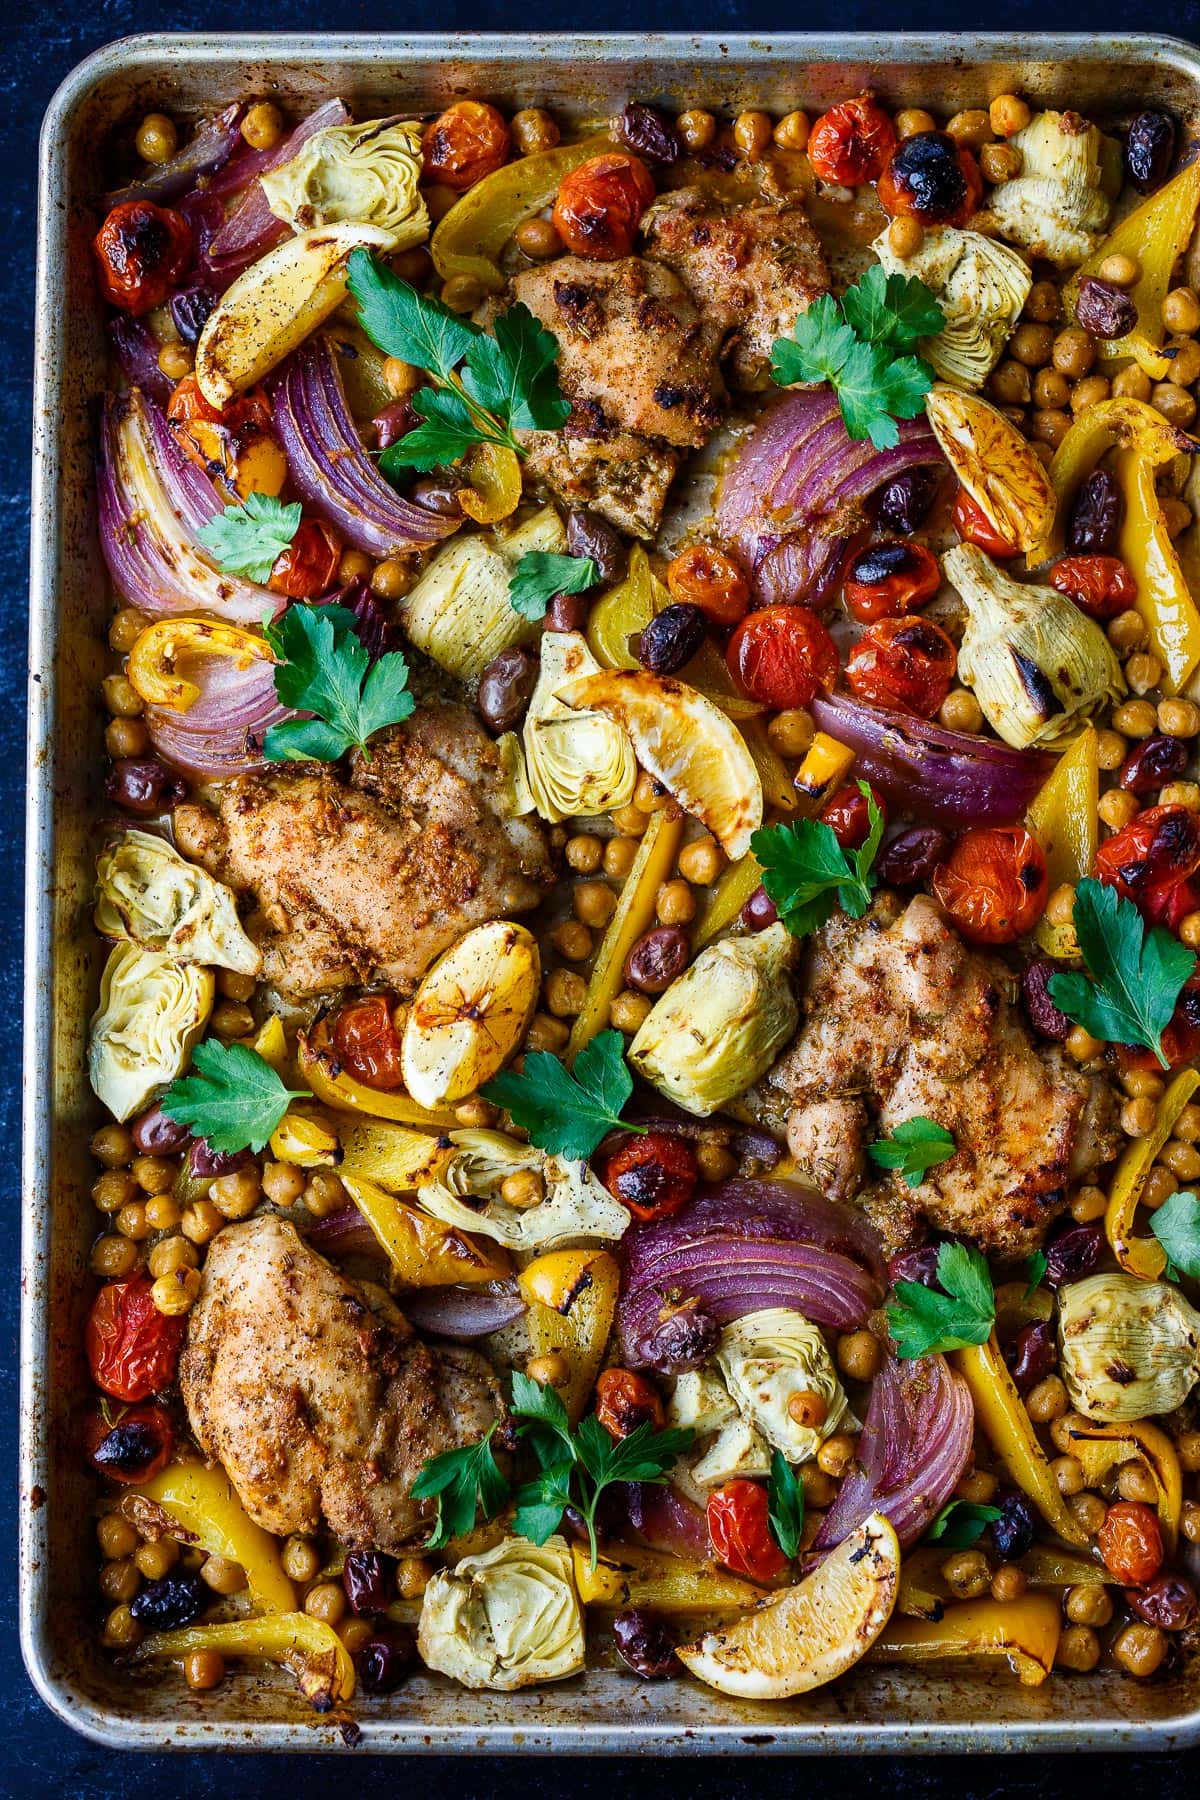 35 Baked Chicken Thigh Recipes: Mediterranean Chicken with chickpeas, veggies, olives and herbs baked until tender and succulent.